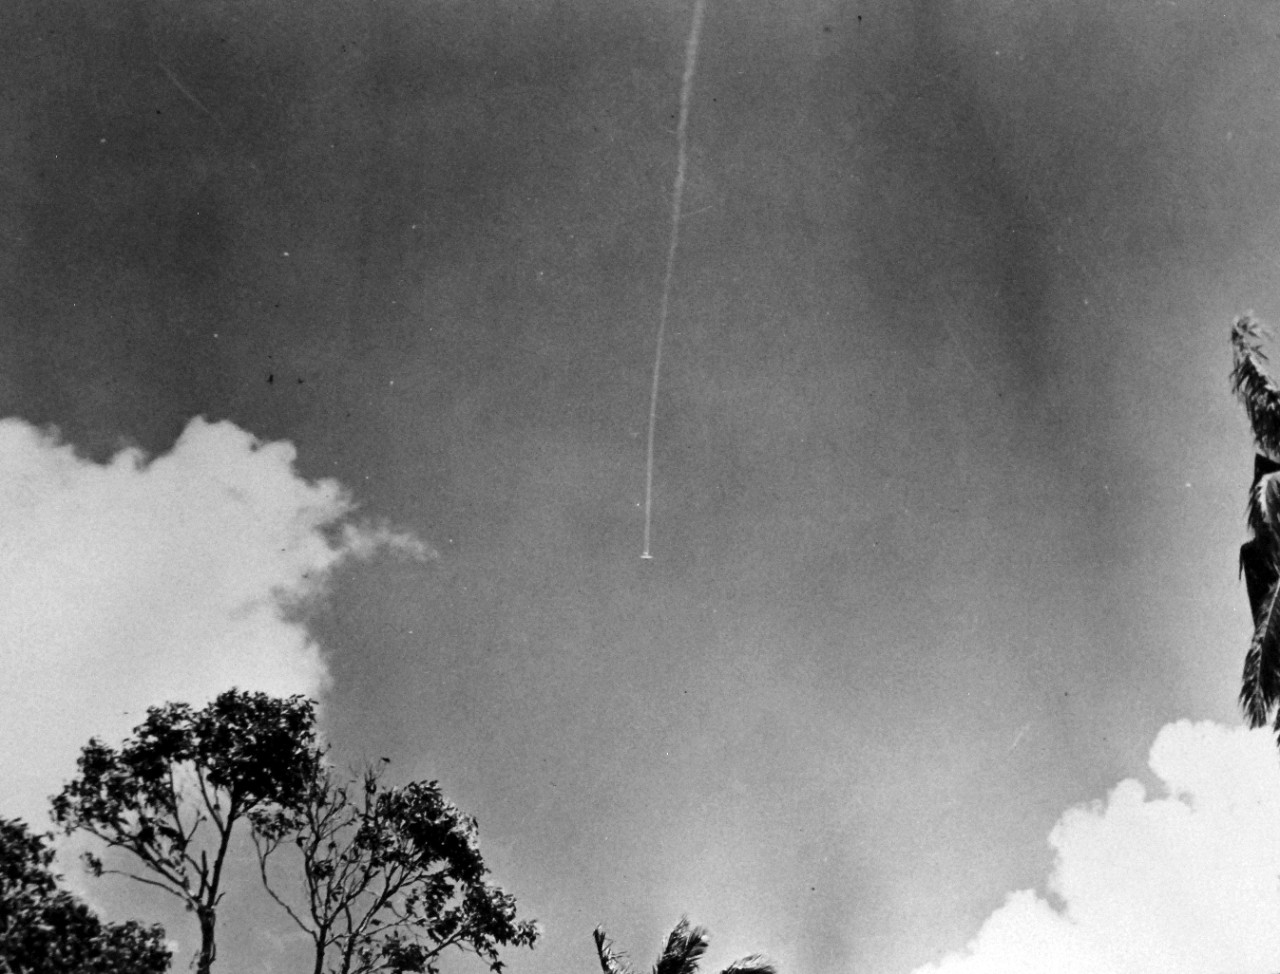 LC-Lot-801-22:  Guadalcanal Campaign, August 1942 – February 1943.  A thin plume of smoke marking the death plunge of a Japanese bomber, shot down by a U.S. Marine fighter plane over Guadalcanal in the early stages of fighting for the Solomon Islands.   Shortly after this picture was taken the plane crashed and exploded.   U.S. Navy Photograph.  Photographed through Mylar sleeve.  Courtesy of the Library of Congress. (2015/11/06).